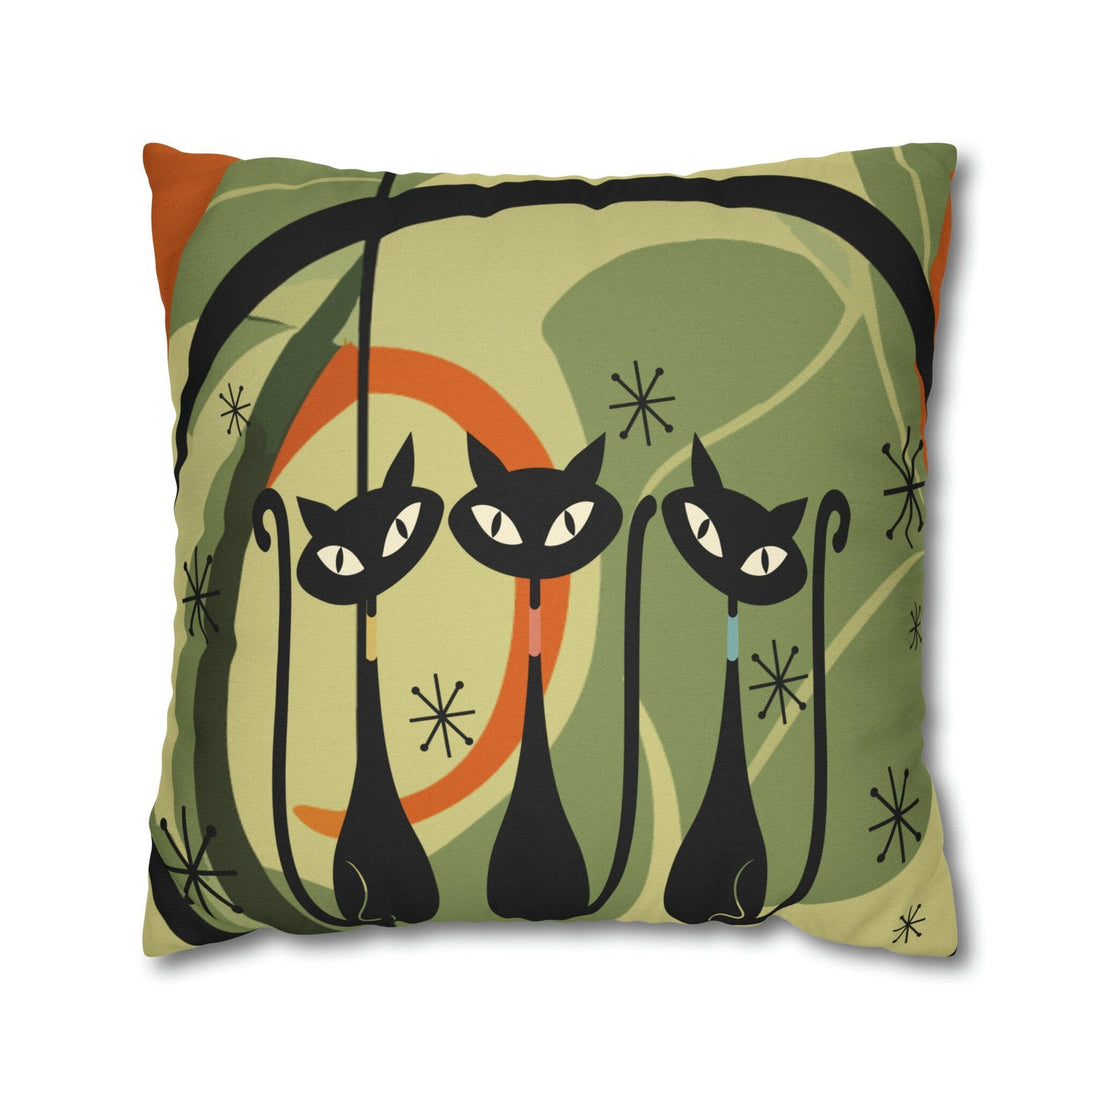 Kate McEnroe New York Atomic Cat 70s Geometric Abstract Throw Pillow Covers, Burnt Orange and Green Mid Century Style Living Room, Bedroom DecorThrow Pillow Covers10737580766034818644